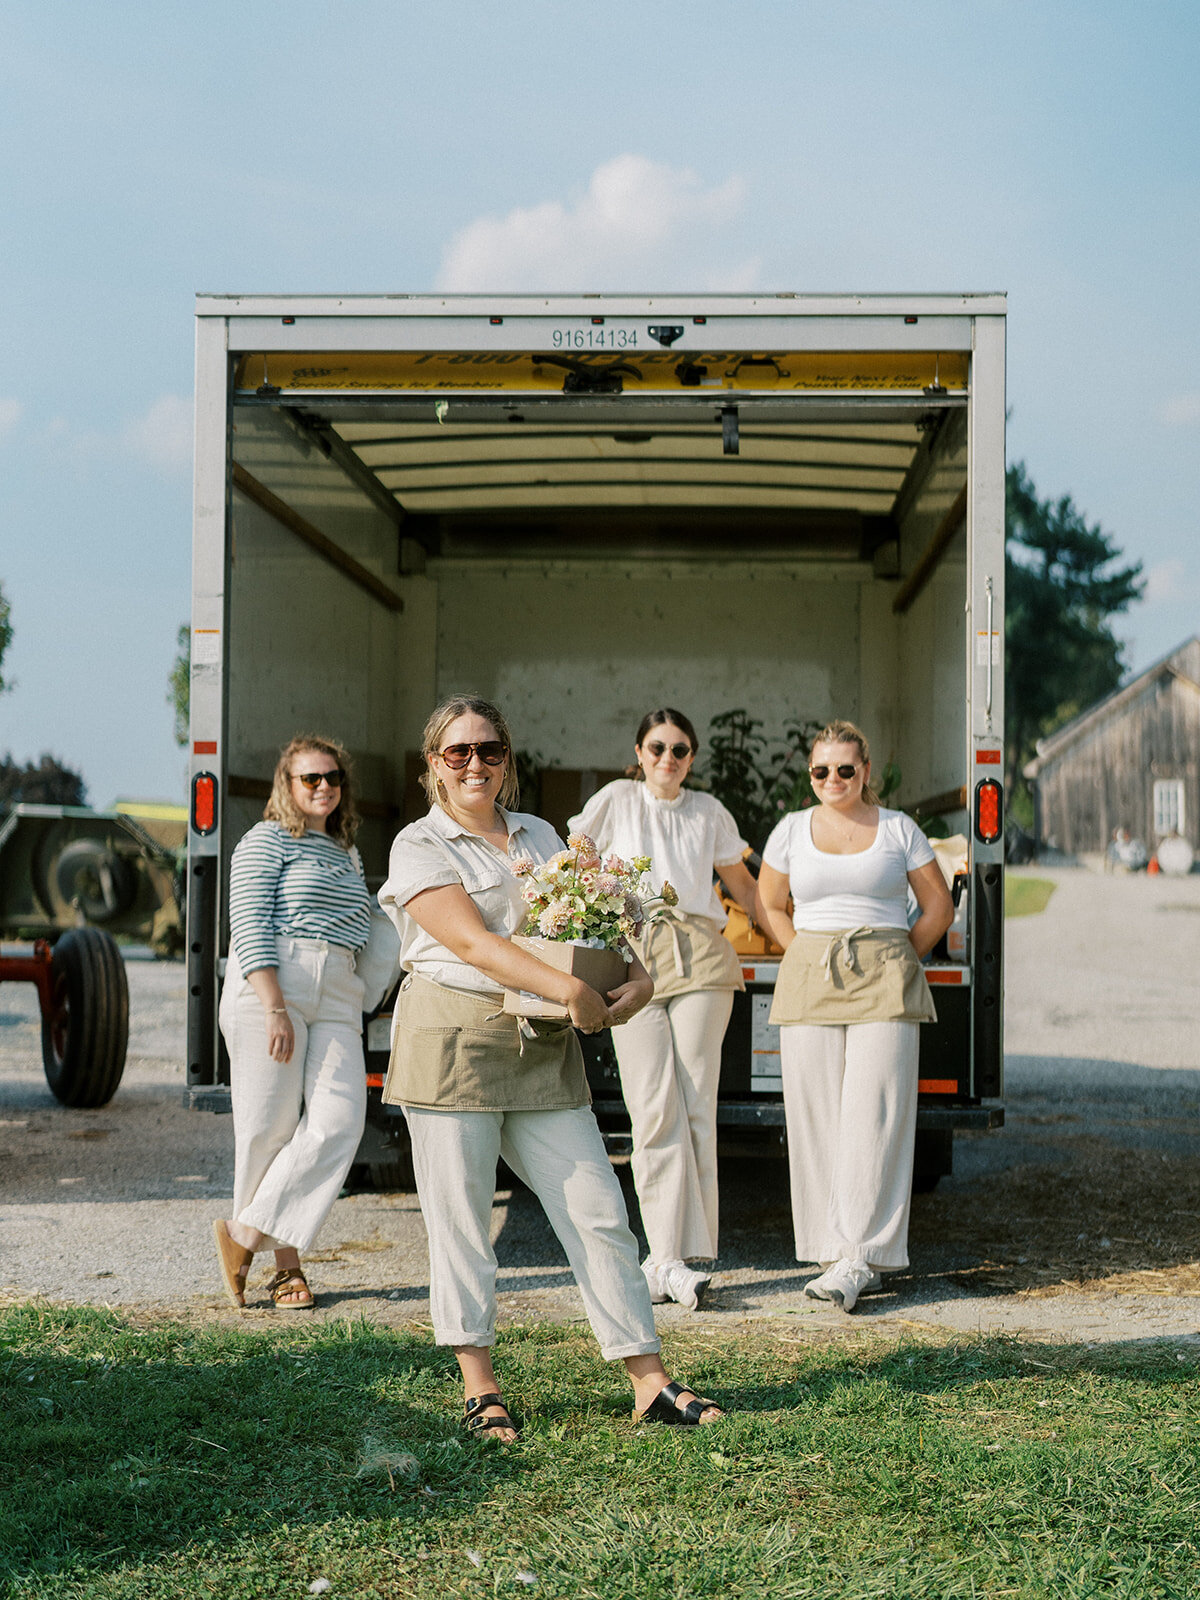 Floral Team dressed in beige and white in front of the truck.